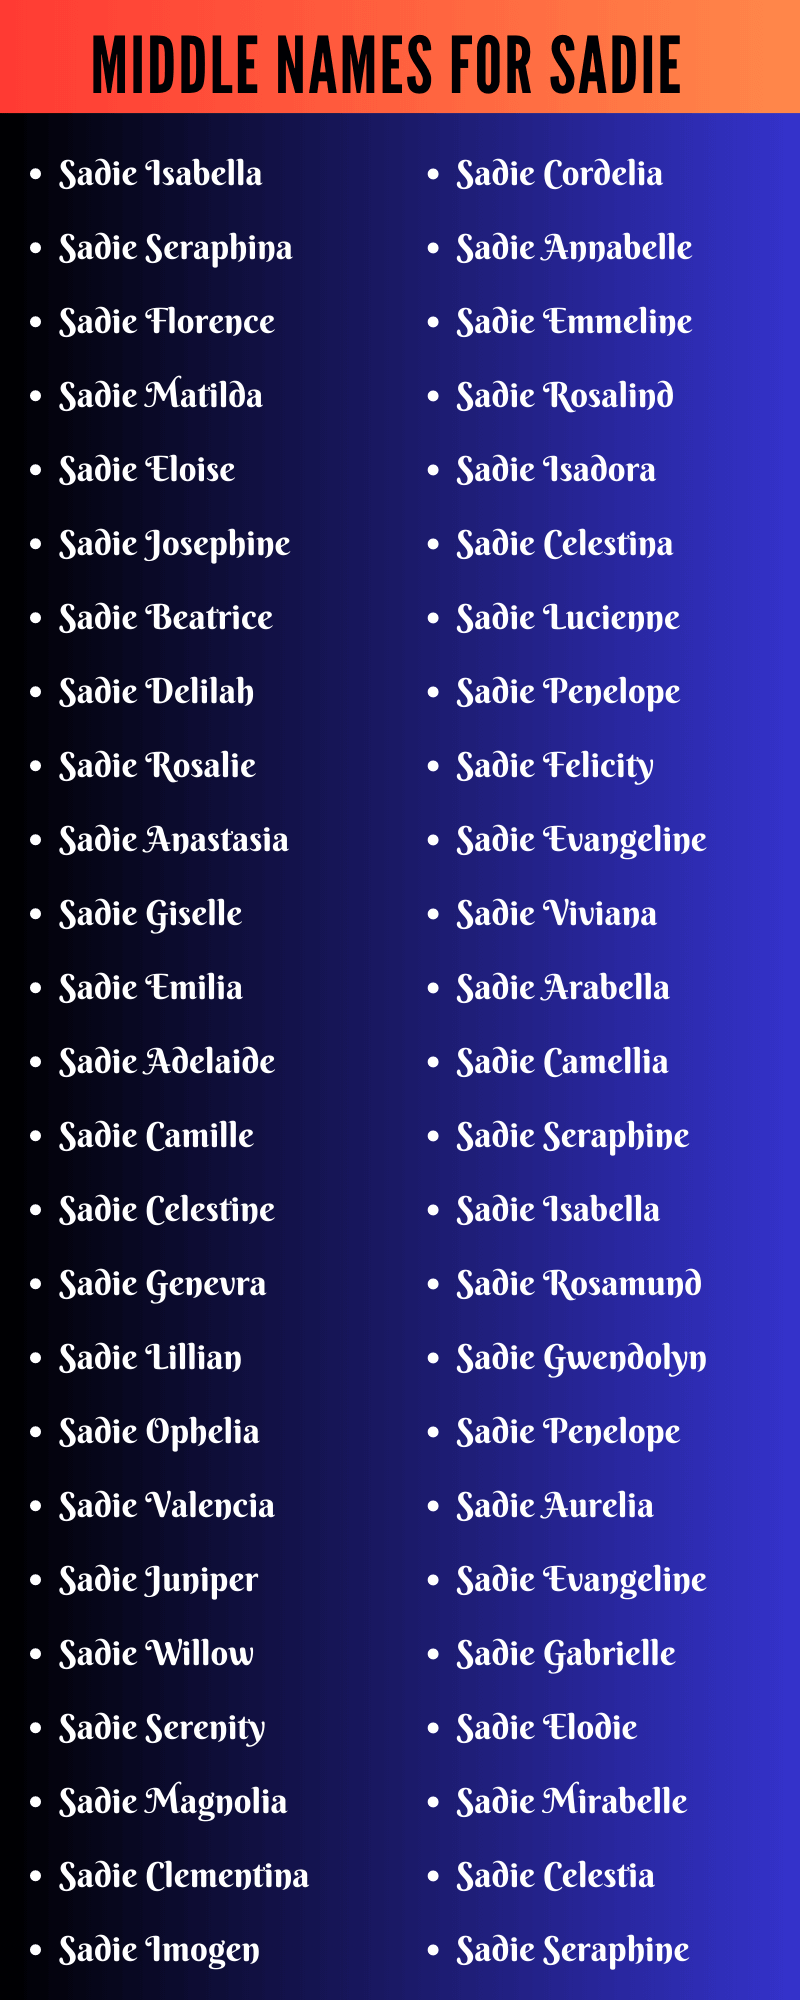 Middle Names For Sadie